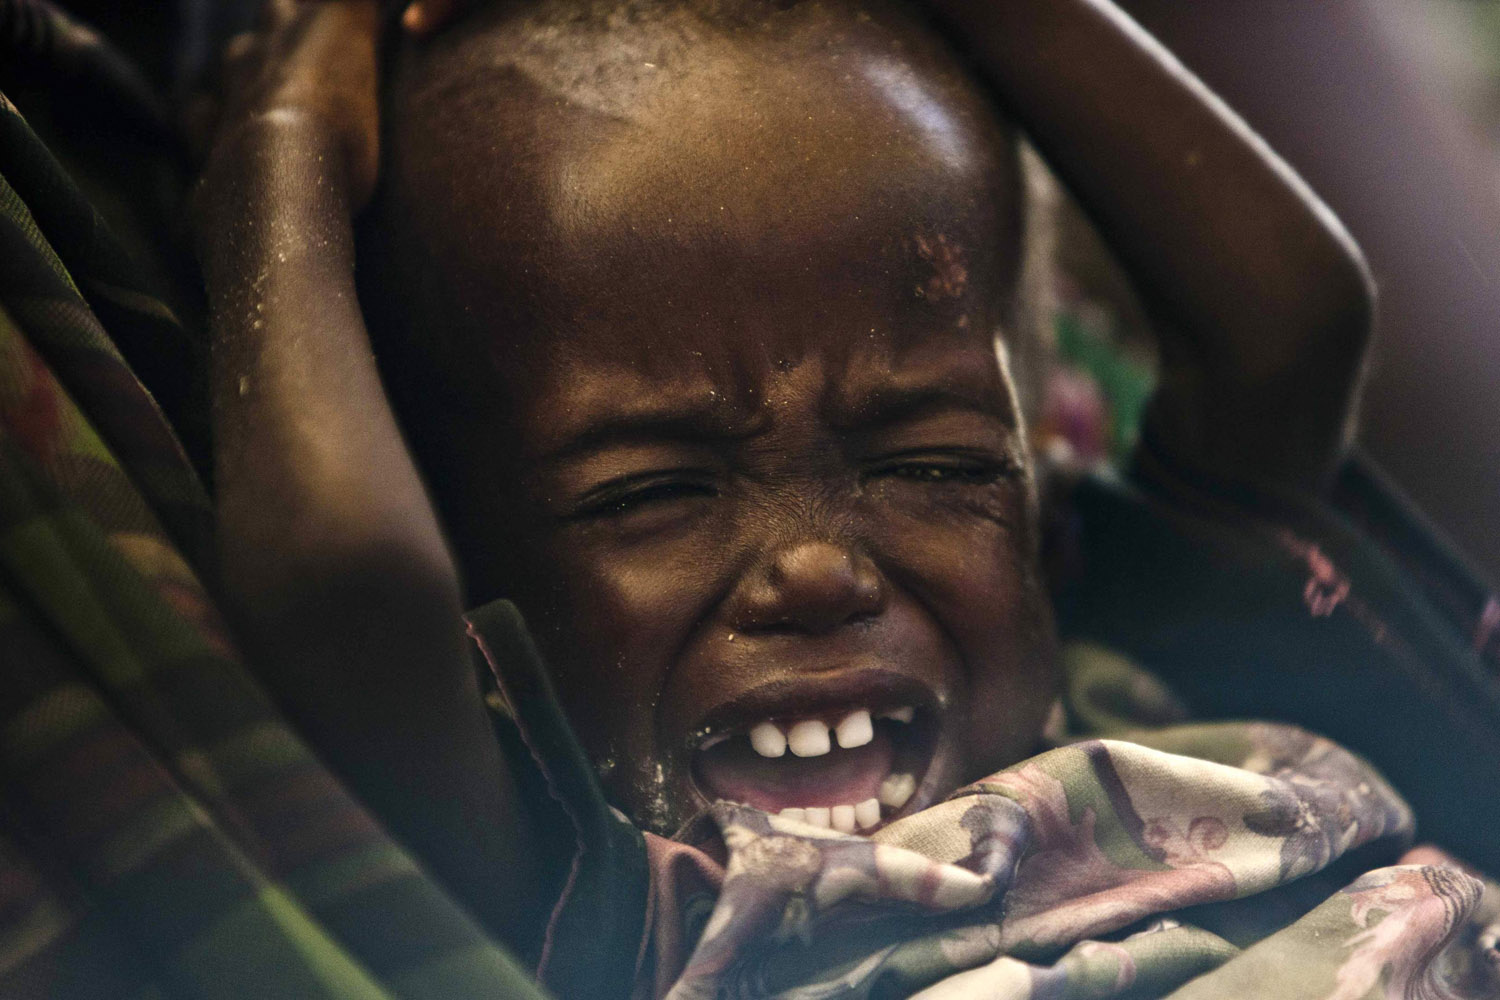 August 8, 2011. Lokor Logitel, a three-year-old girl, cries at  the Mukutano feeding centre in Naduat Village, northwest of Kenya's capital Nairobi. The famine in the Horn of Africa is spreading and may soon engulf as many as six more regions of the lawless nation of Somalia.